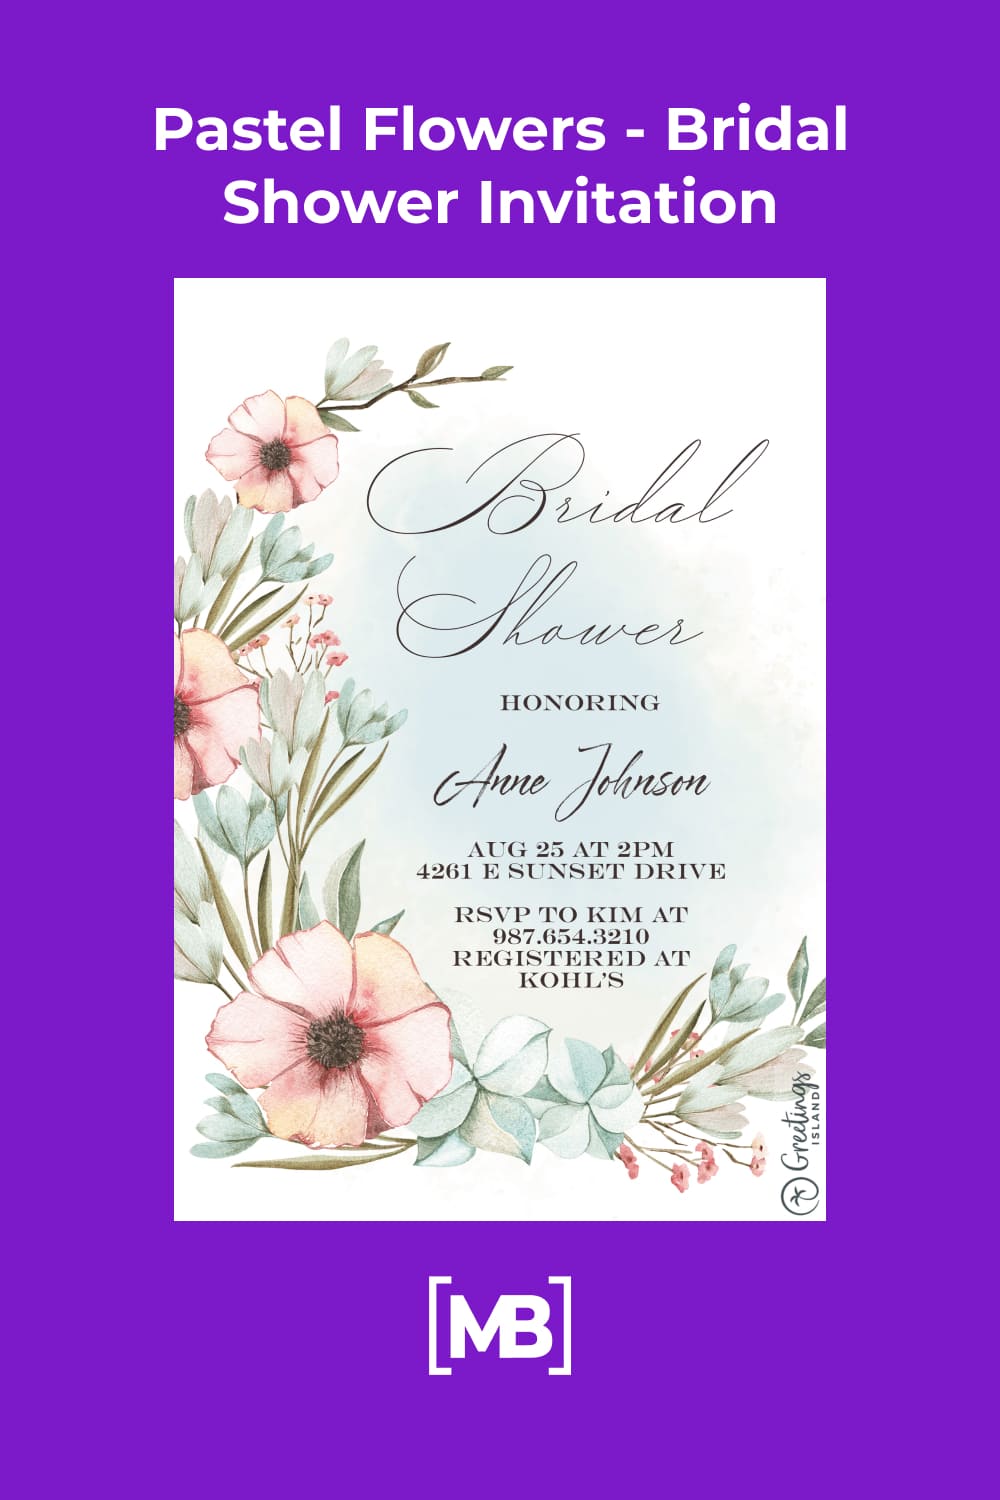 These are delicate invitations with watercolor flowers.